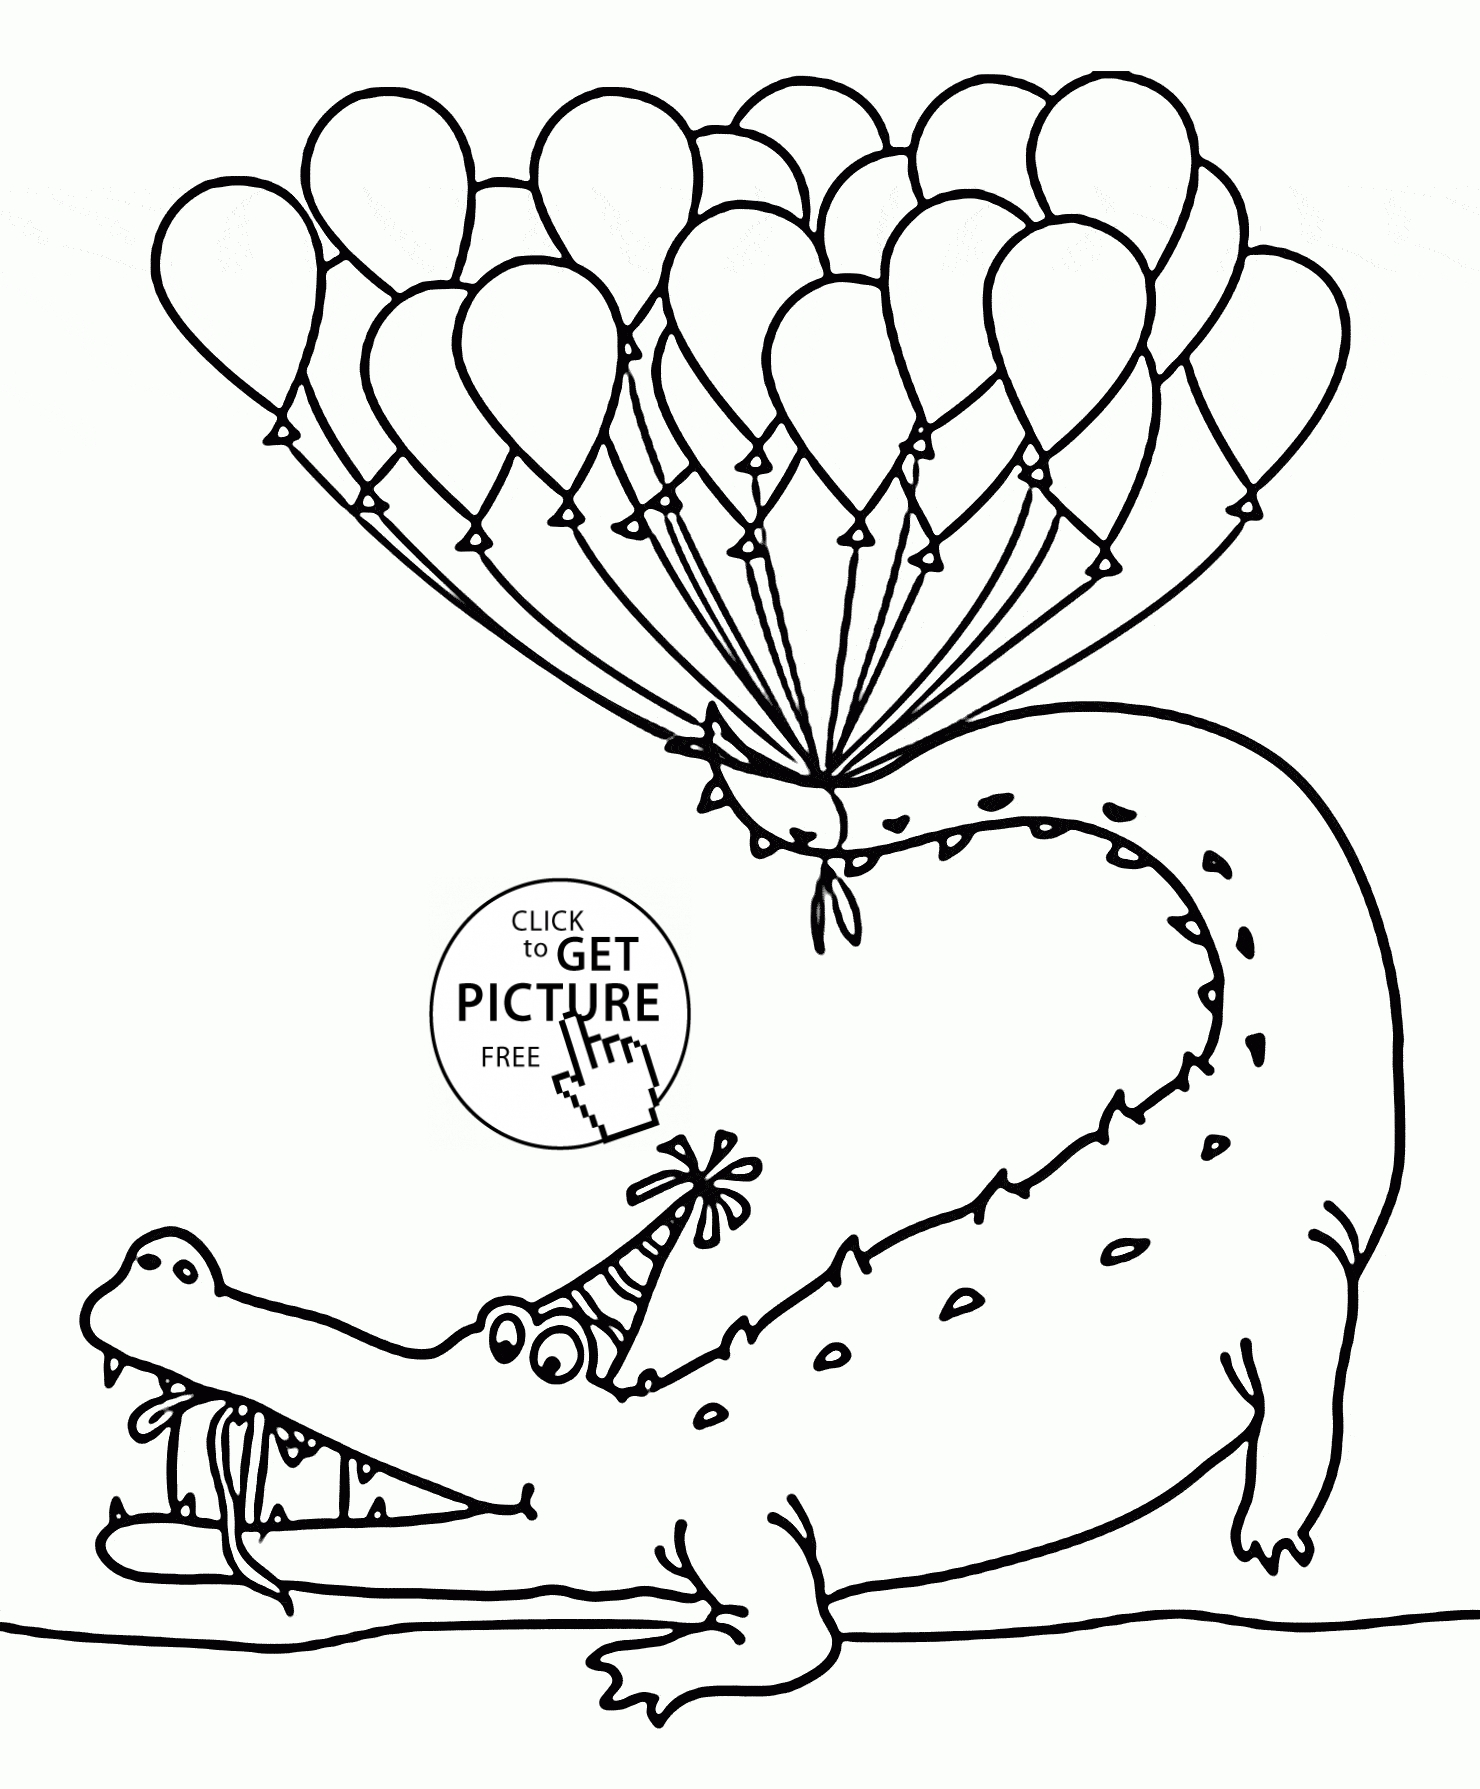 Coloring Page Alligator 24 Alligator Coloring Pages Printable Free Coloring Pages